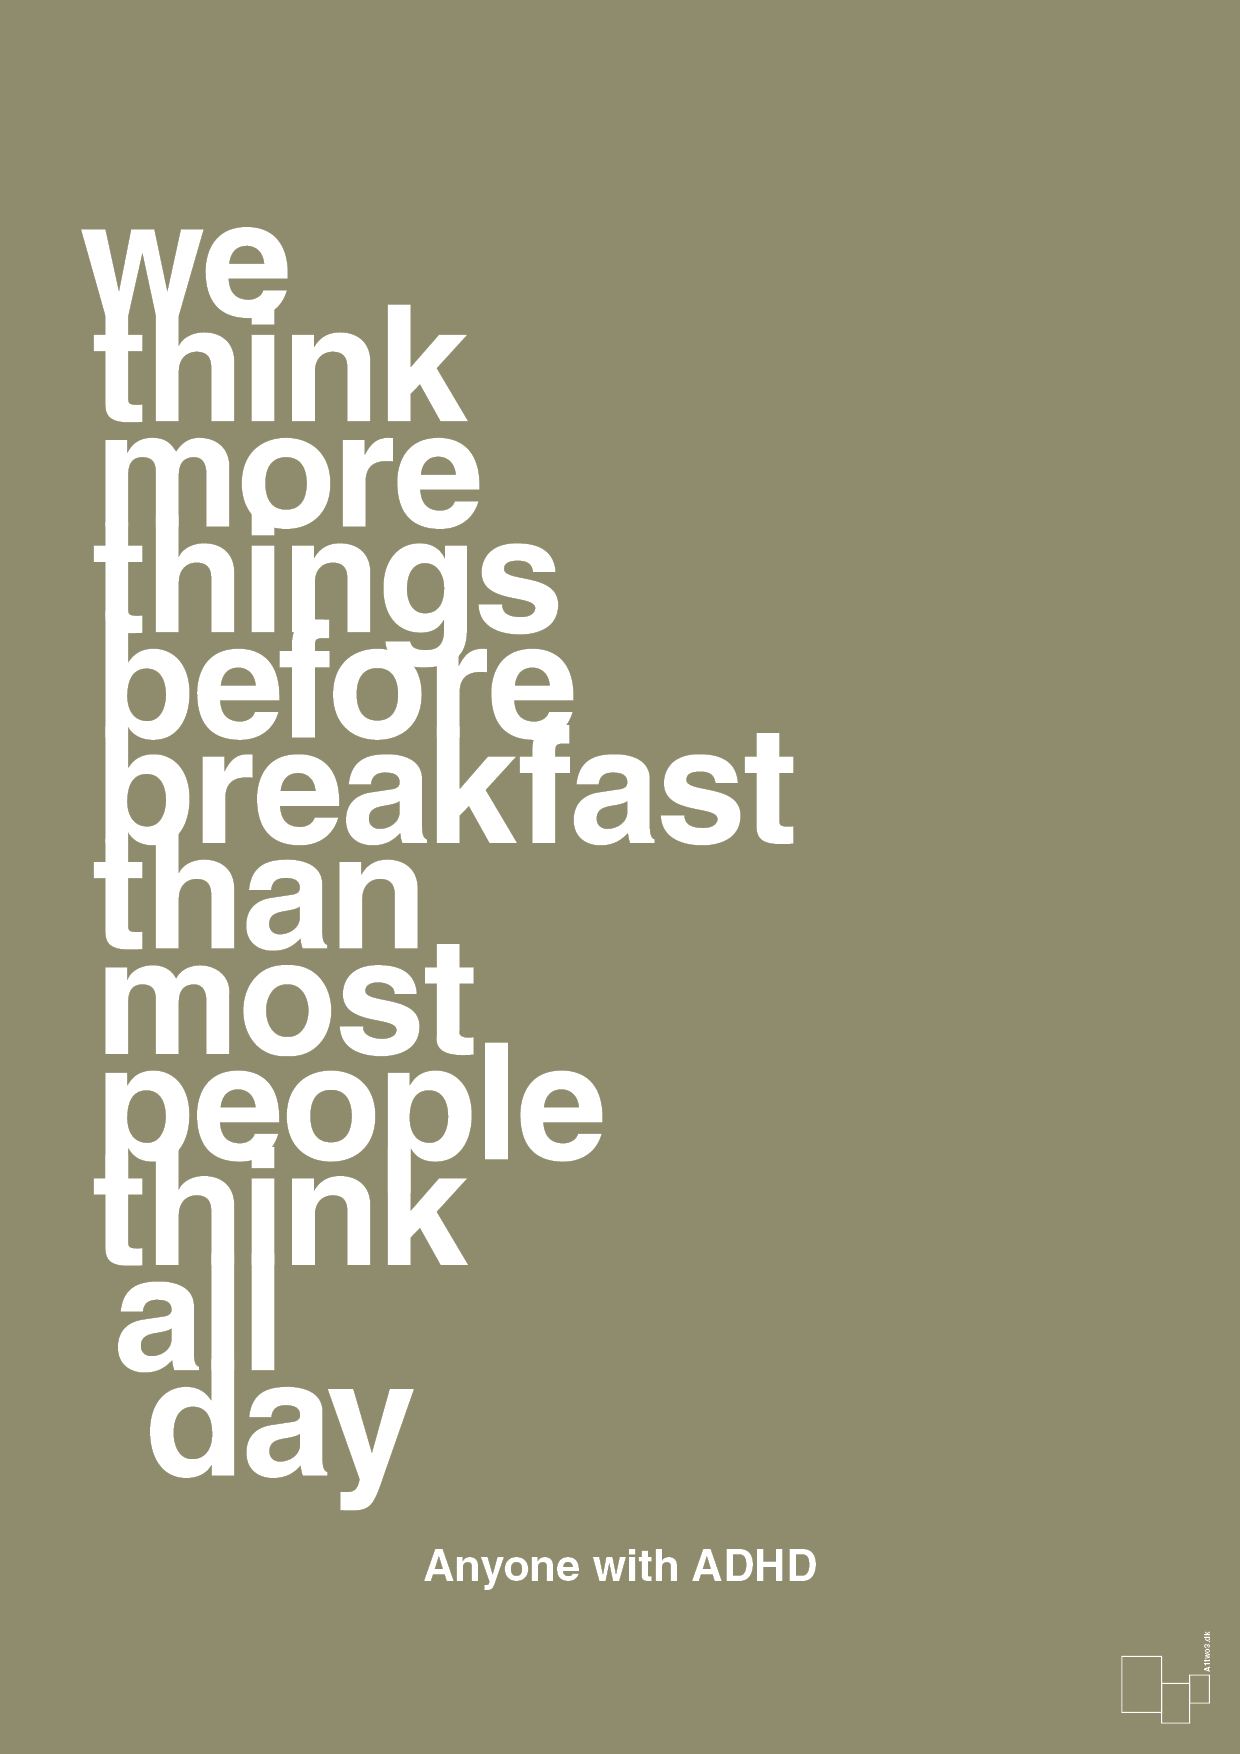 we think more things before breakfast than most people think all day - Plakat med Samfund i Misty Forrest